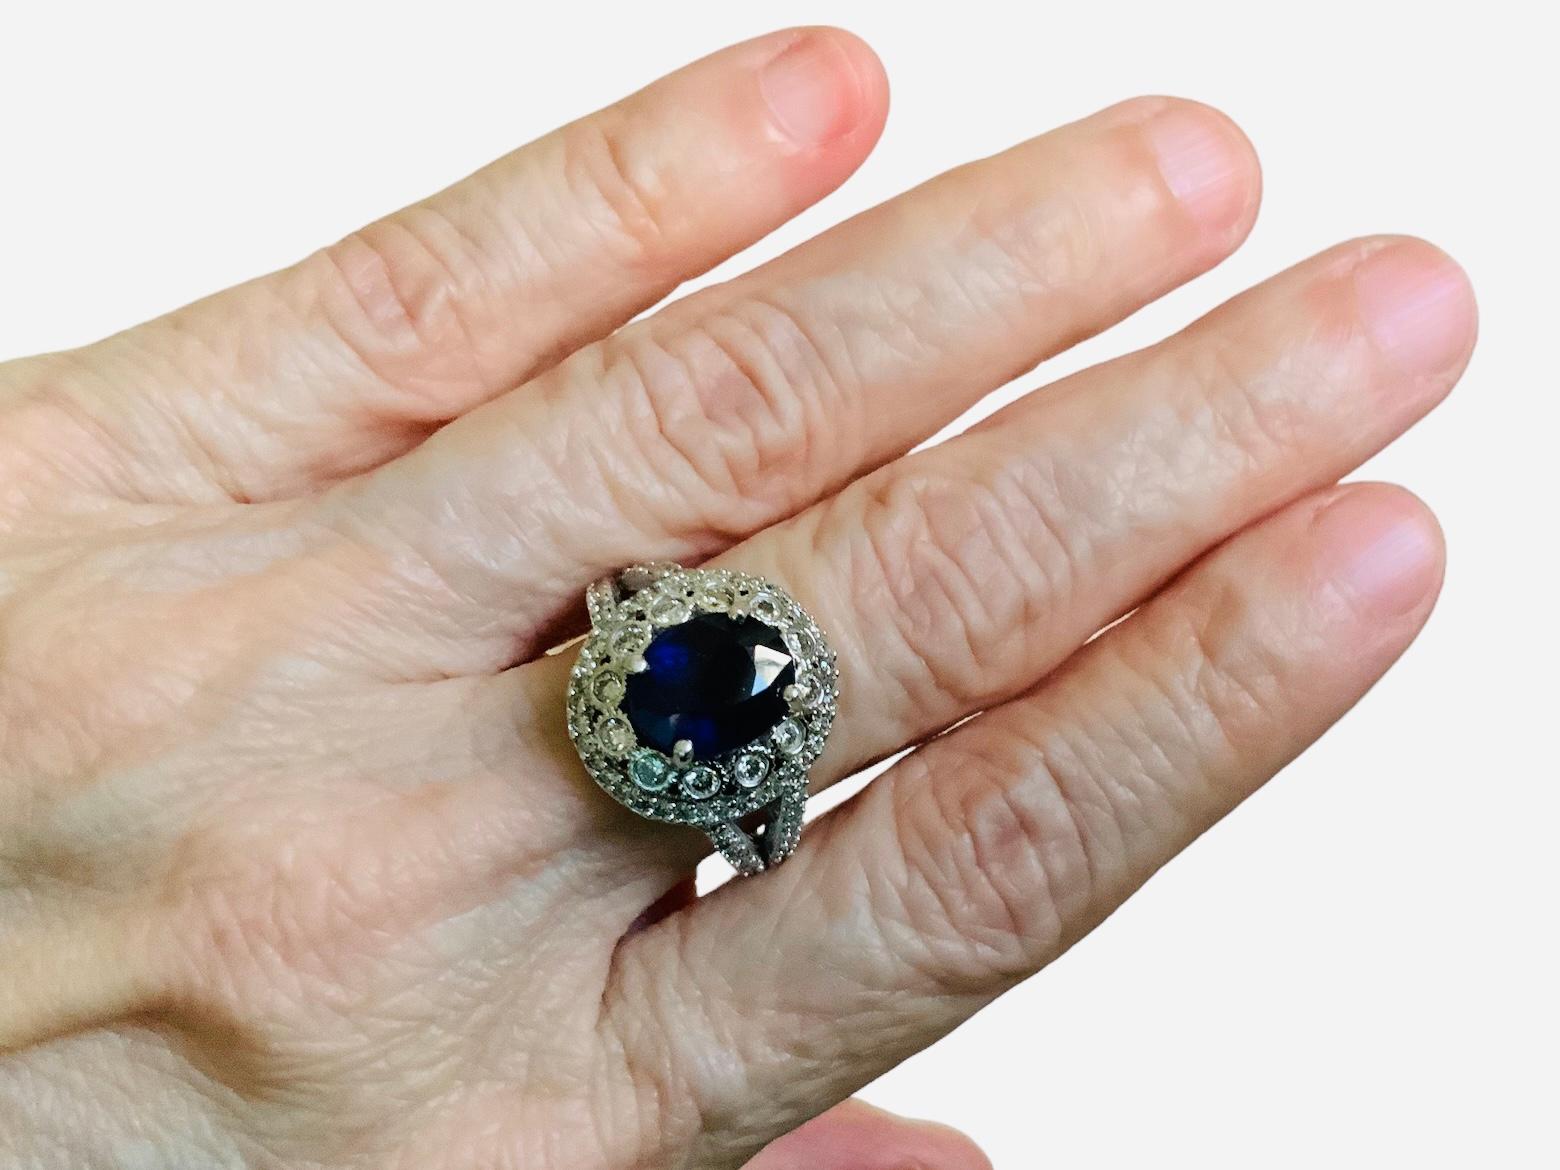 This is a 14K White Gold, Diamonds and Sapphire Ring. It depicts a queen like ring consisting of an intense royal blue color oval shape cut natural sapphire ( Quality- AA, Carat Weight- 3.35) and 82 natural round diamonds( Color- I-J, Quality-